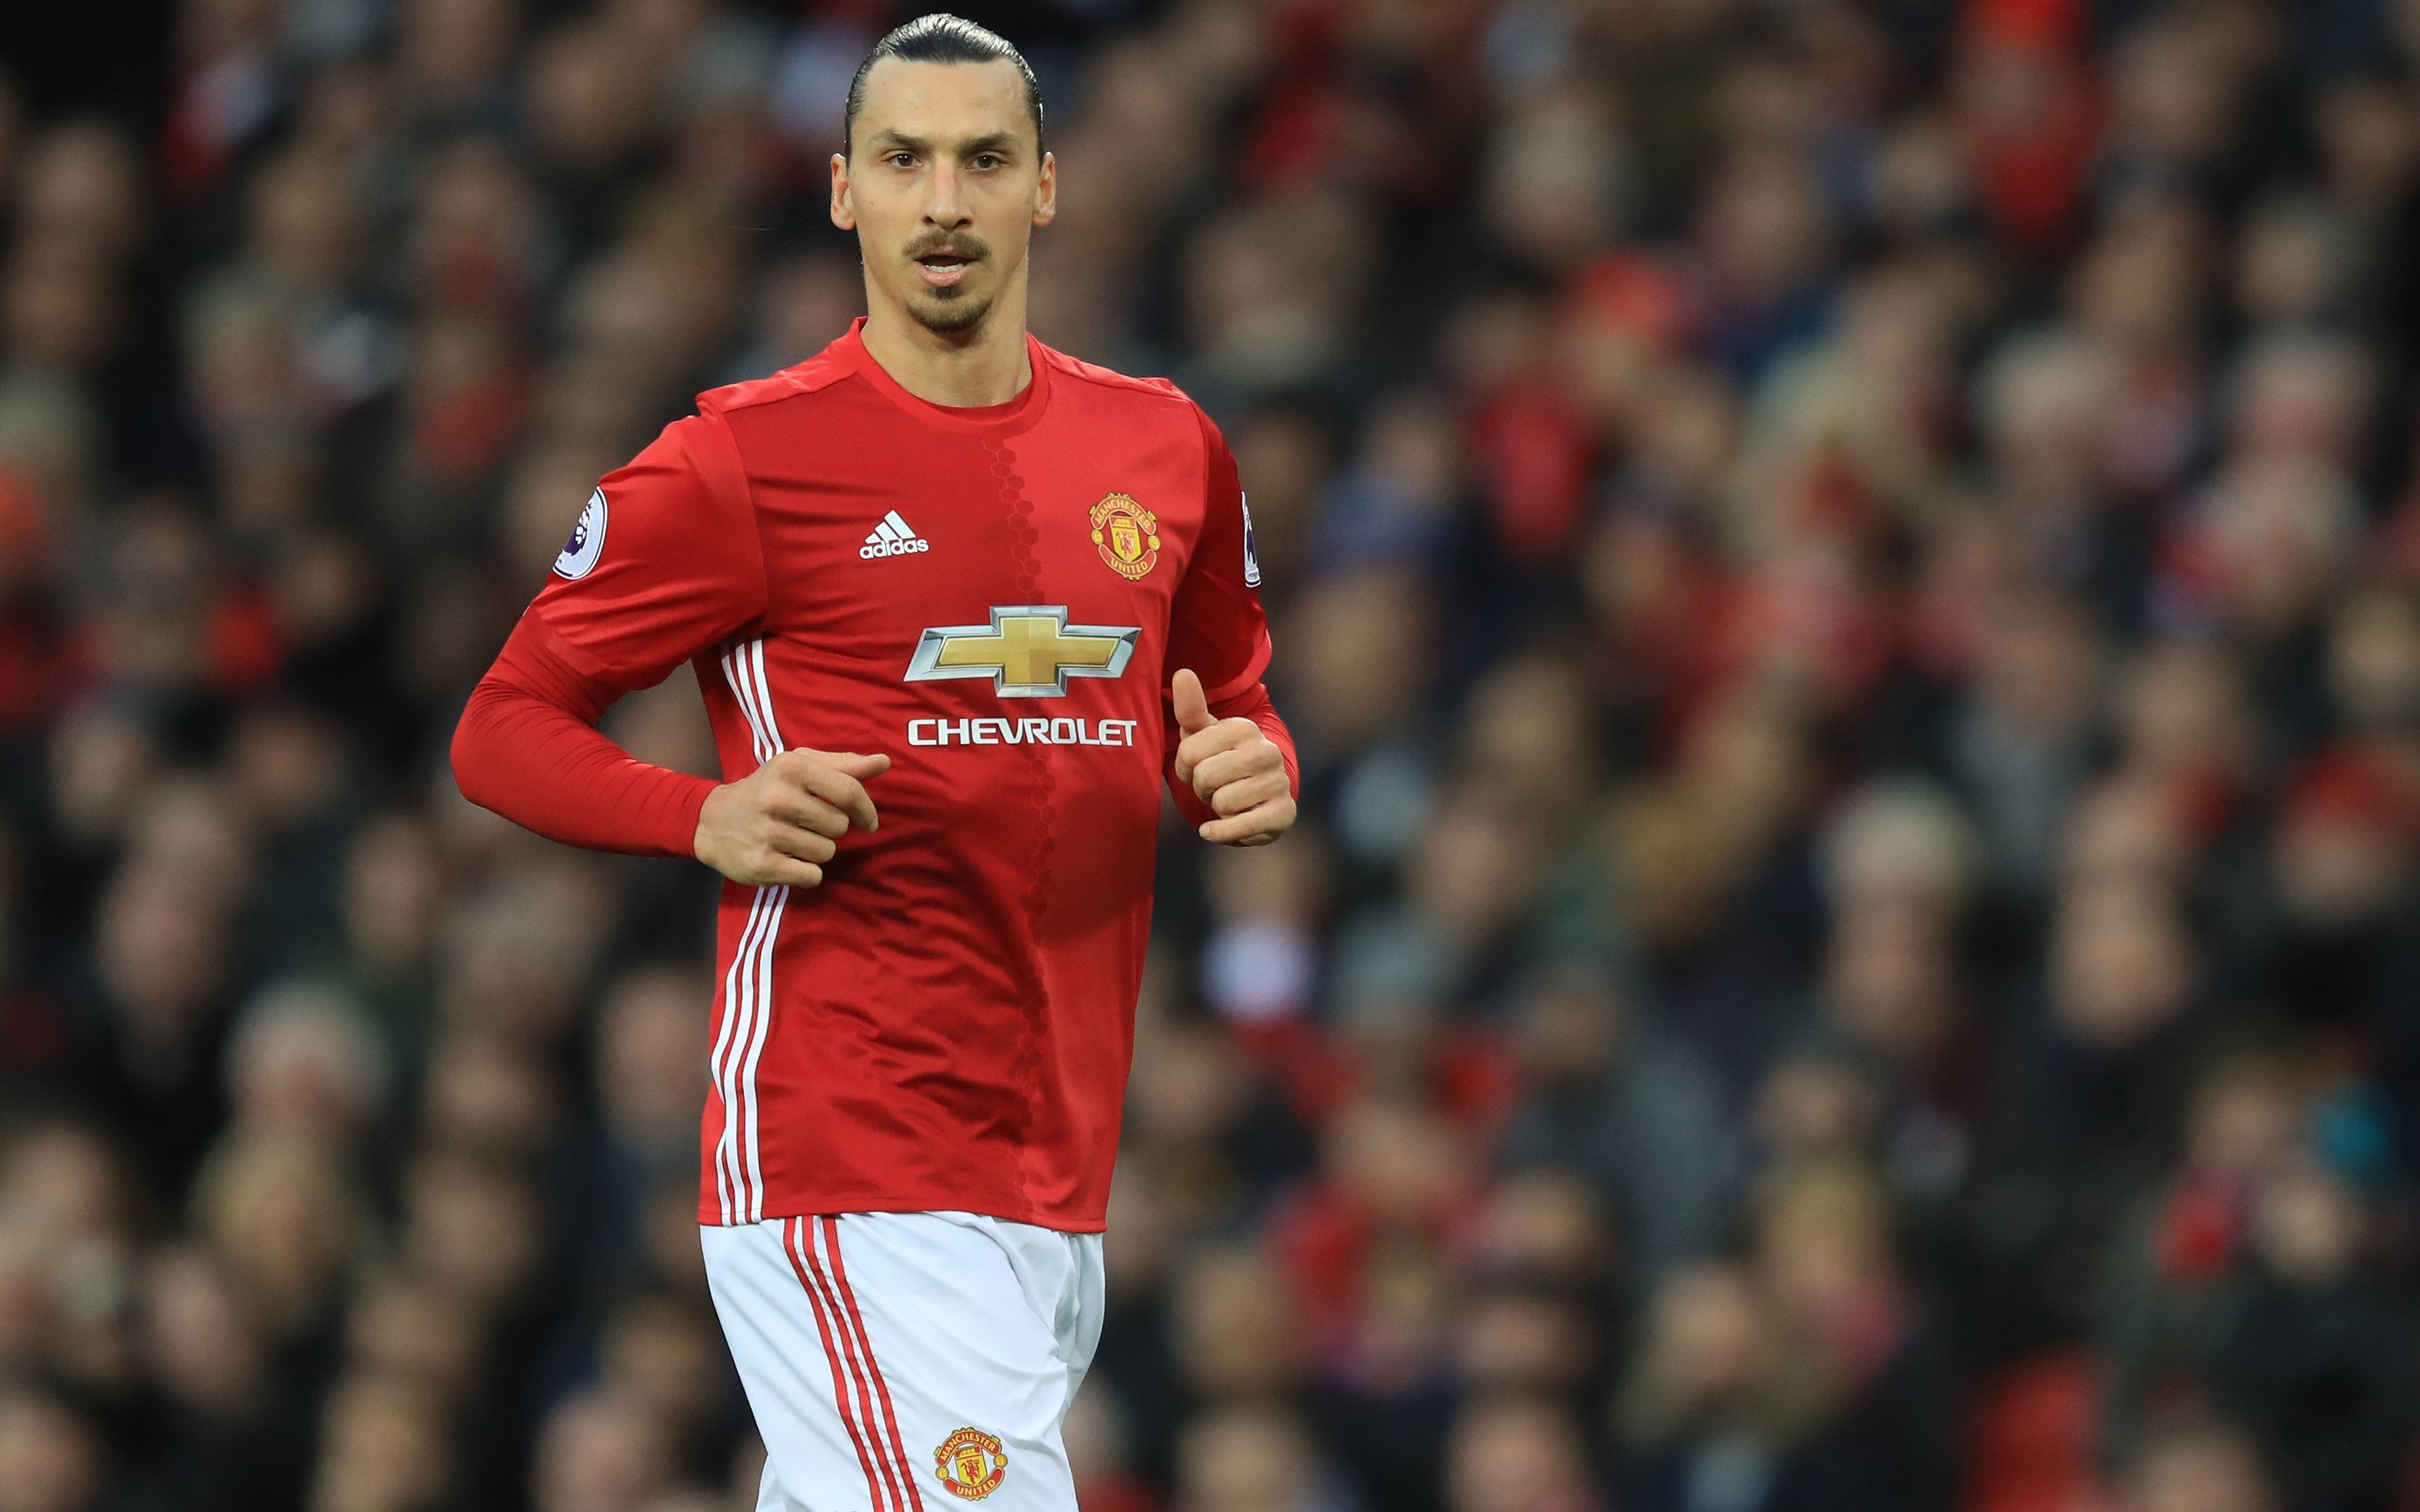 Zlatan Ibrahimovic Wallpaper Manchester United - Download Images Of Footballers - HD Wallpaper 